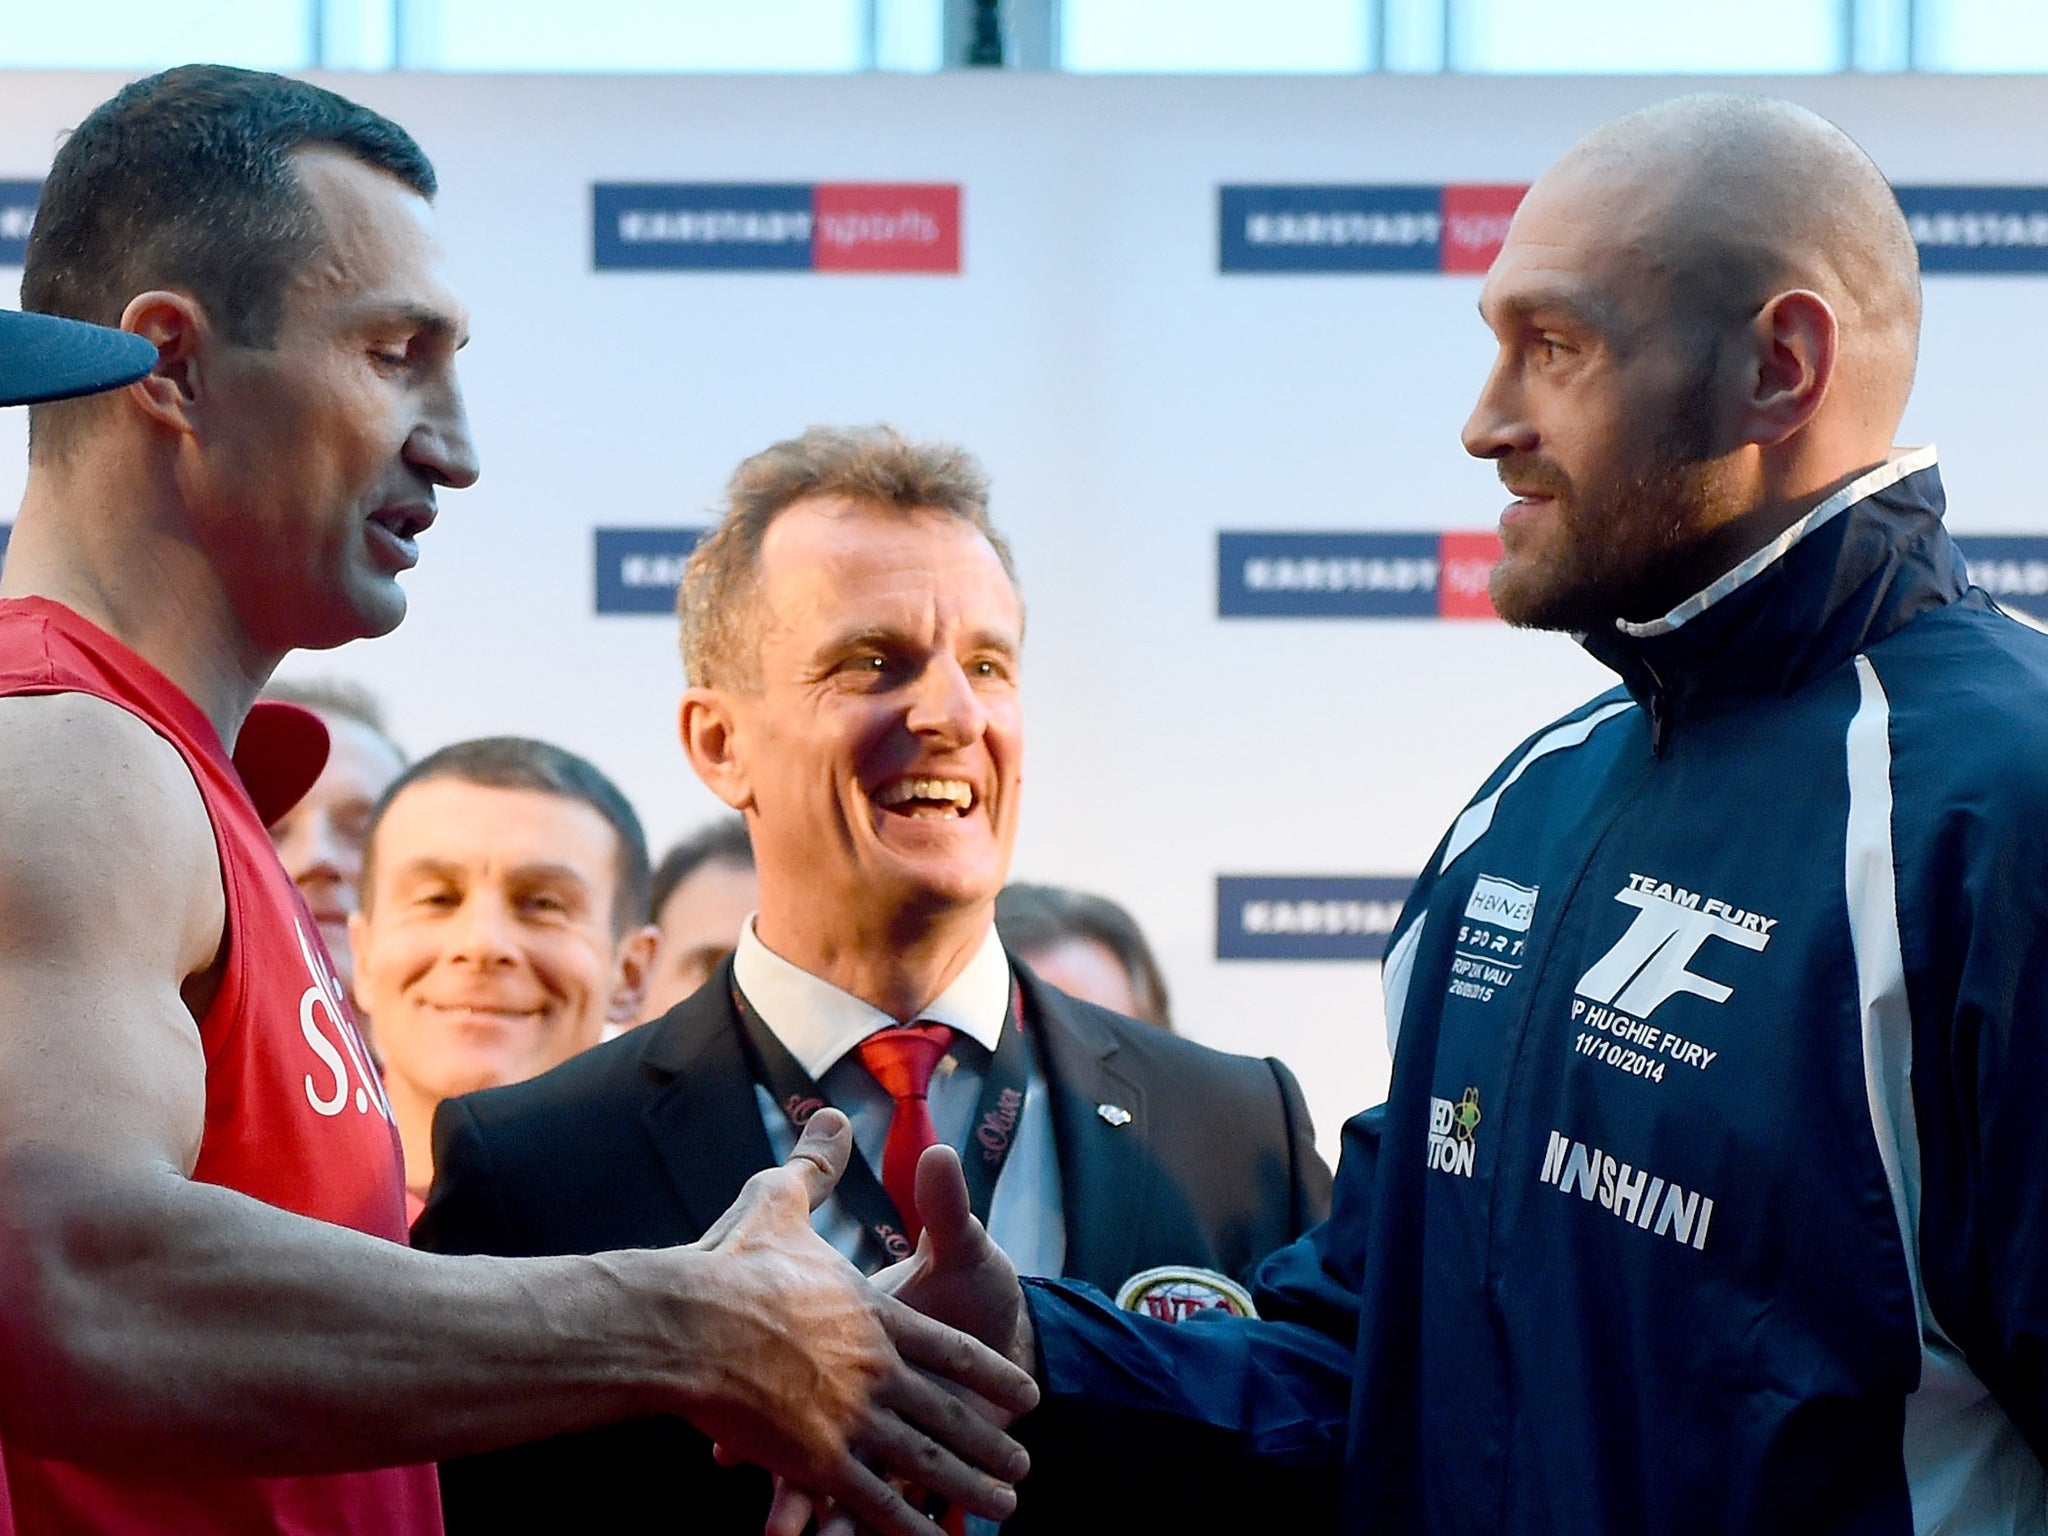 Wladimir Klitschko and Tyson Fury shake hands after today's weigh in, but Fury rejected his hand before the weigh in